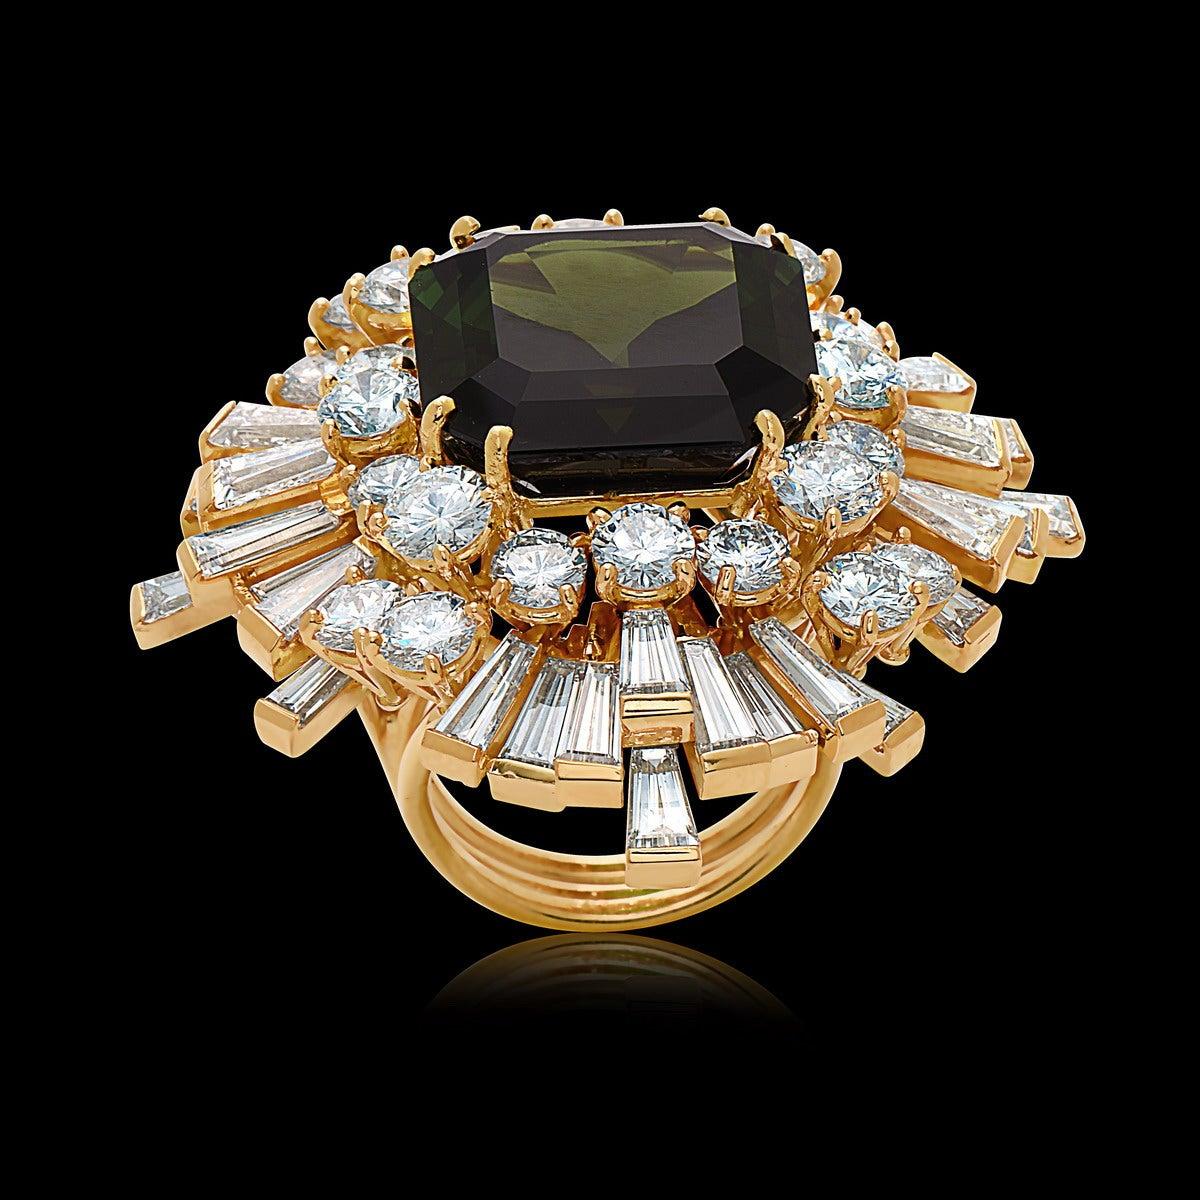 A signed Fred Paris cocktail ring featuring a 21.71 Carat Emerald-Cut, Dark-Green Tourmaline surrounded by a sprawling 15 Carats of White-Diamonds in a symmetrical design. The tourmaline is exceptionally clean and a fabulous dark green. In excellent